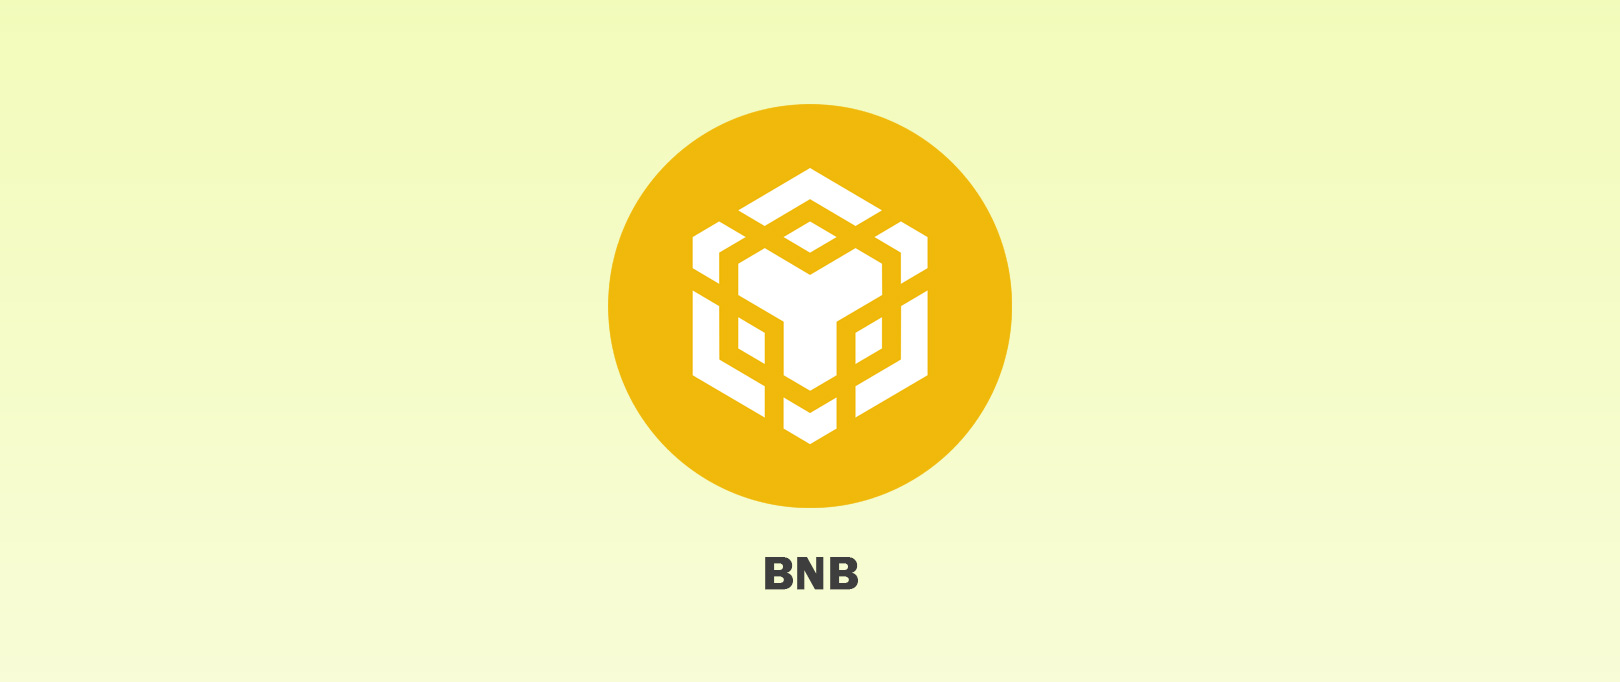 How to buy Binance BNB and Bitcoin cryptocurrencies online at home and earn money as part time jobs in Sri Lanka